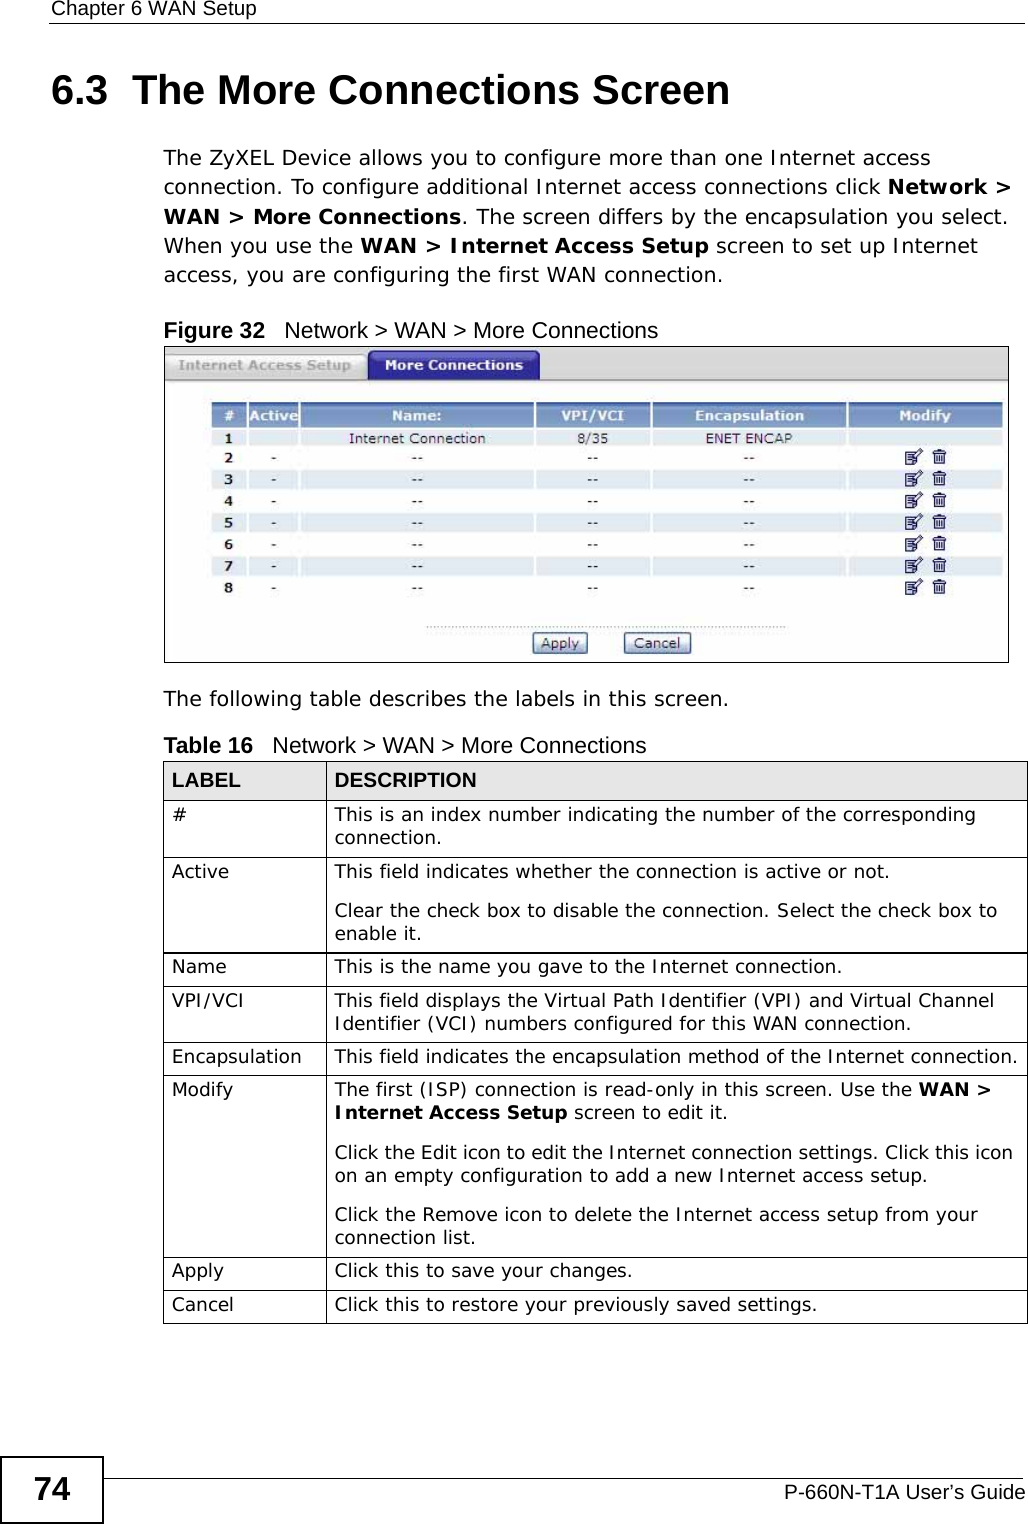 Chapter 6 WAN SetupP-660N-T1A User’s Guide746.3  The More Connections ScreenThe ZyXEL Device allows you to configure more than one Internet access connection. To configure additional Internet access connections click Network &gt; WAN &gt; More Connections. The screen differs by the encapsulation you select. When you use the WAN &gt; Internet Access Setup screen to set up Internet access, you are configuring the first WAN connection.Figure 32   Network &gt; WAN &gt; More ConnectionsThe following table describes the labels in this screen.  Table 16   Network &gt; WAN &gt; More ConnectionsLABEL DESCRIPTION# This is an index number indicating the number of the corresponding connection.Active This field indicates whether the connection is active or not.Clear the check box to disable the connection. Select the check box to enable it.Name This is the name you gave to the Internet connection.VPI/VCI This field displays the Virtual Path Identifier (VPI) and Virtual Channel Identifier (VCI) numbers configured for this WAN connection. Encapsulation This field indicates the encapsulation method of the Internet connection.Modify The first (ISP) connection is read-only in this screen. Use the WAN &gt; Internet Access Setup screen to edit it.Click the Edit icon to edit the Internet connection settings. Click this icon on an empty configuration to add a new Internet access setup.Click the Remove icon to delete the Internet access setup from your connection list.Apply Click this to save your changes. Cancel Click this to restore your previously saved settings.